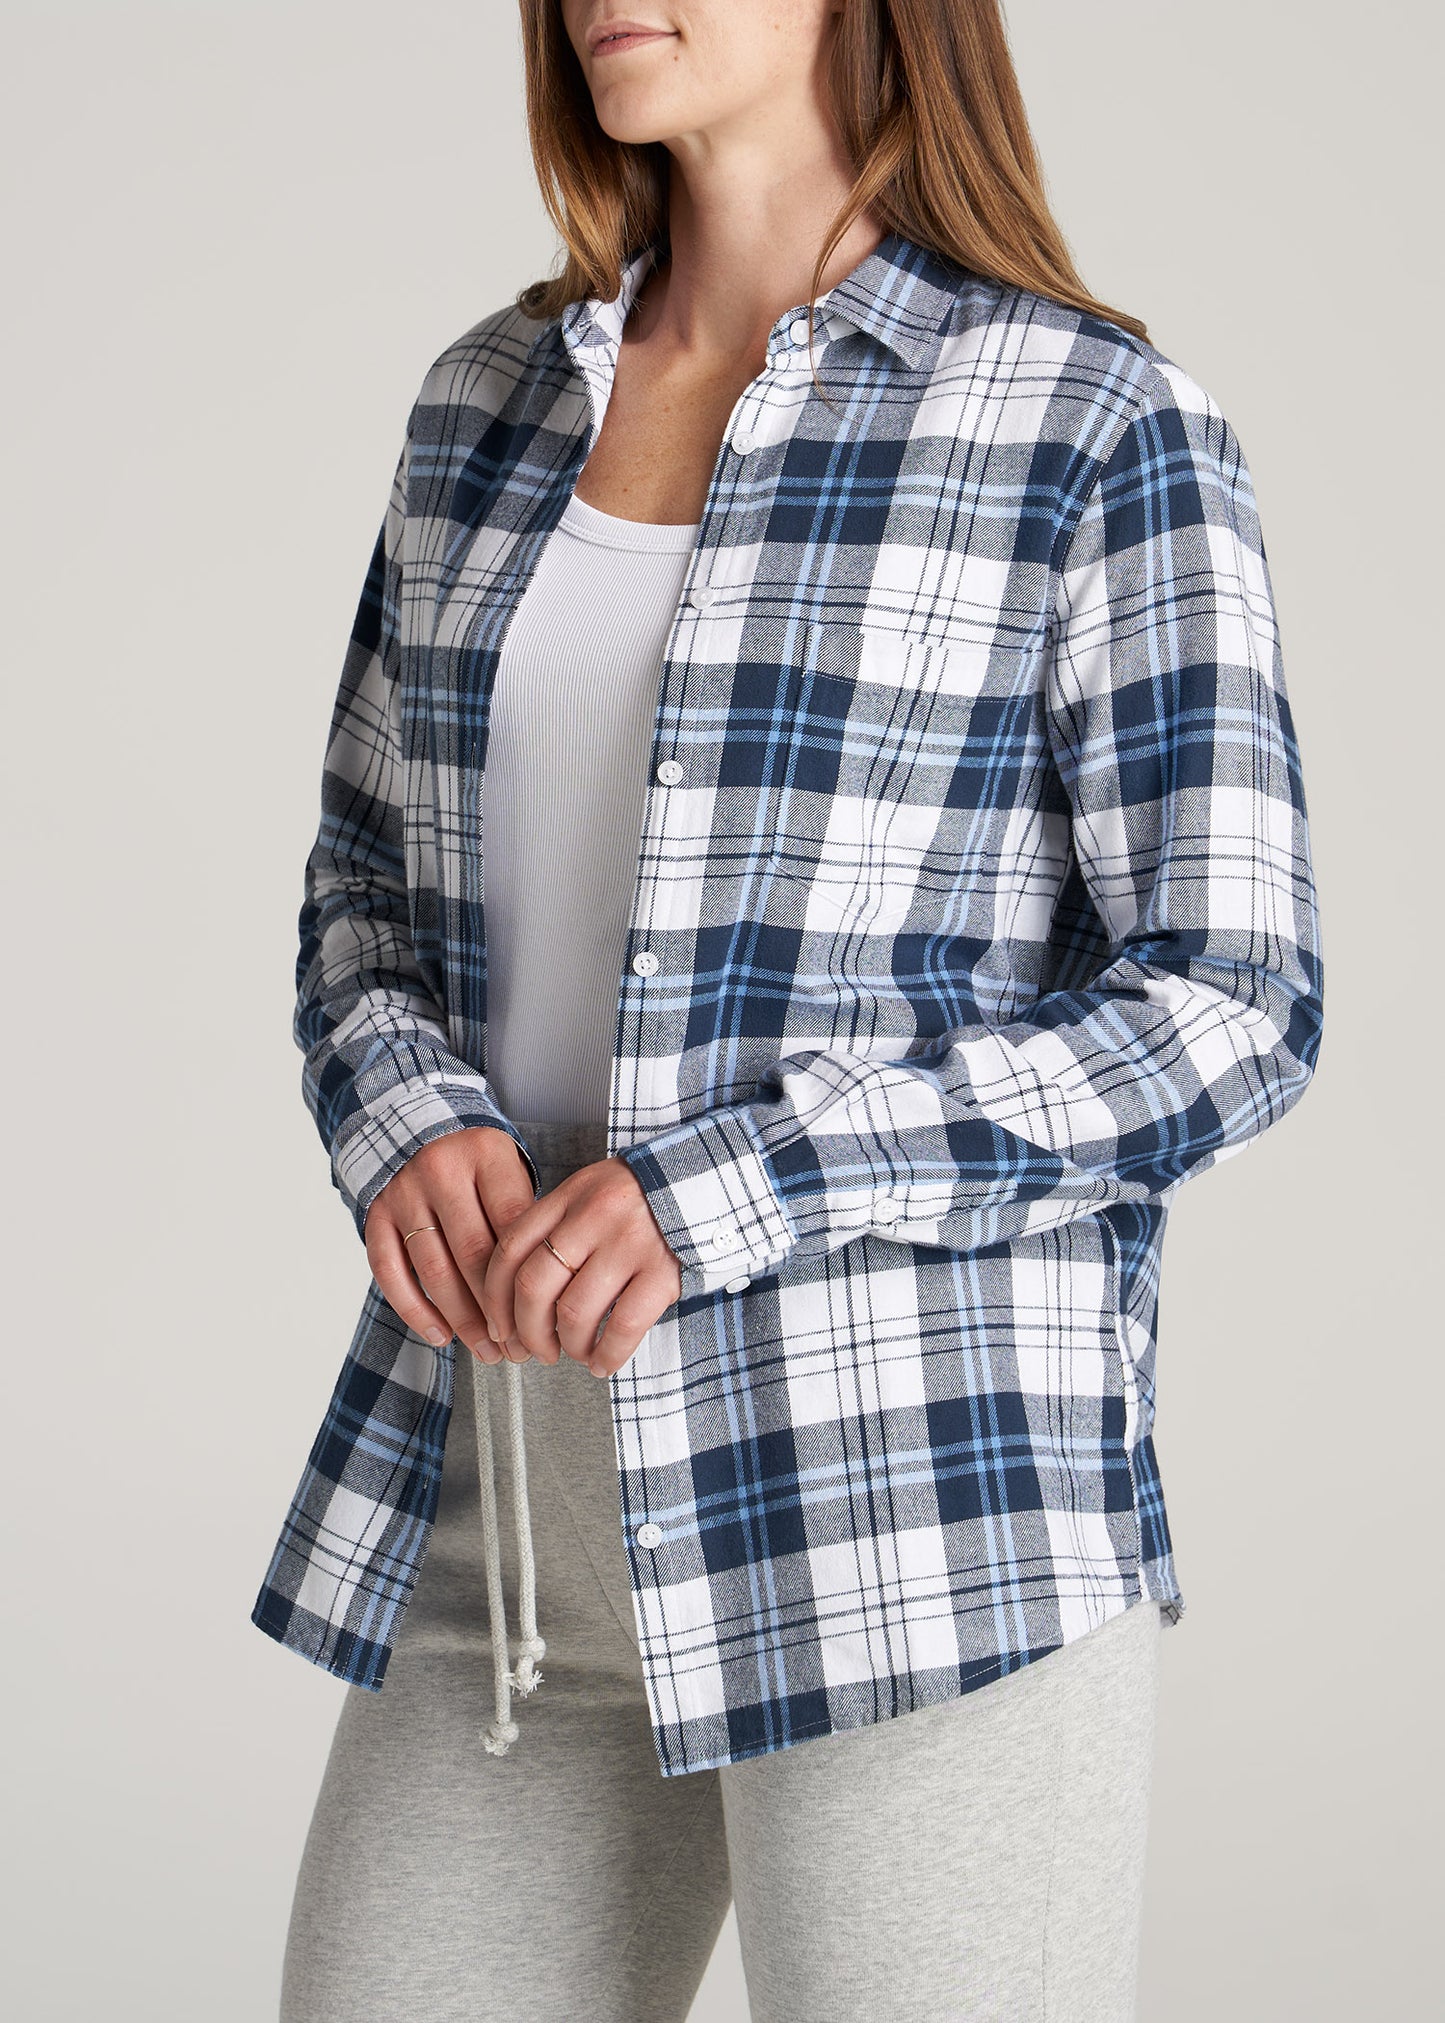     American-Tall-Women-Flannel-Button-up-Shirt-Blue-White-Plaid-side